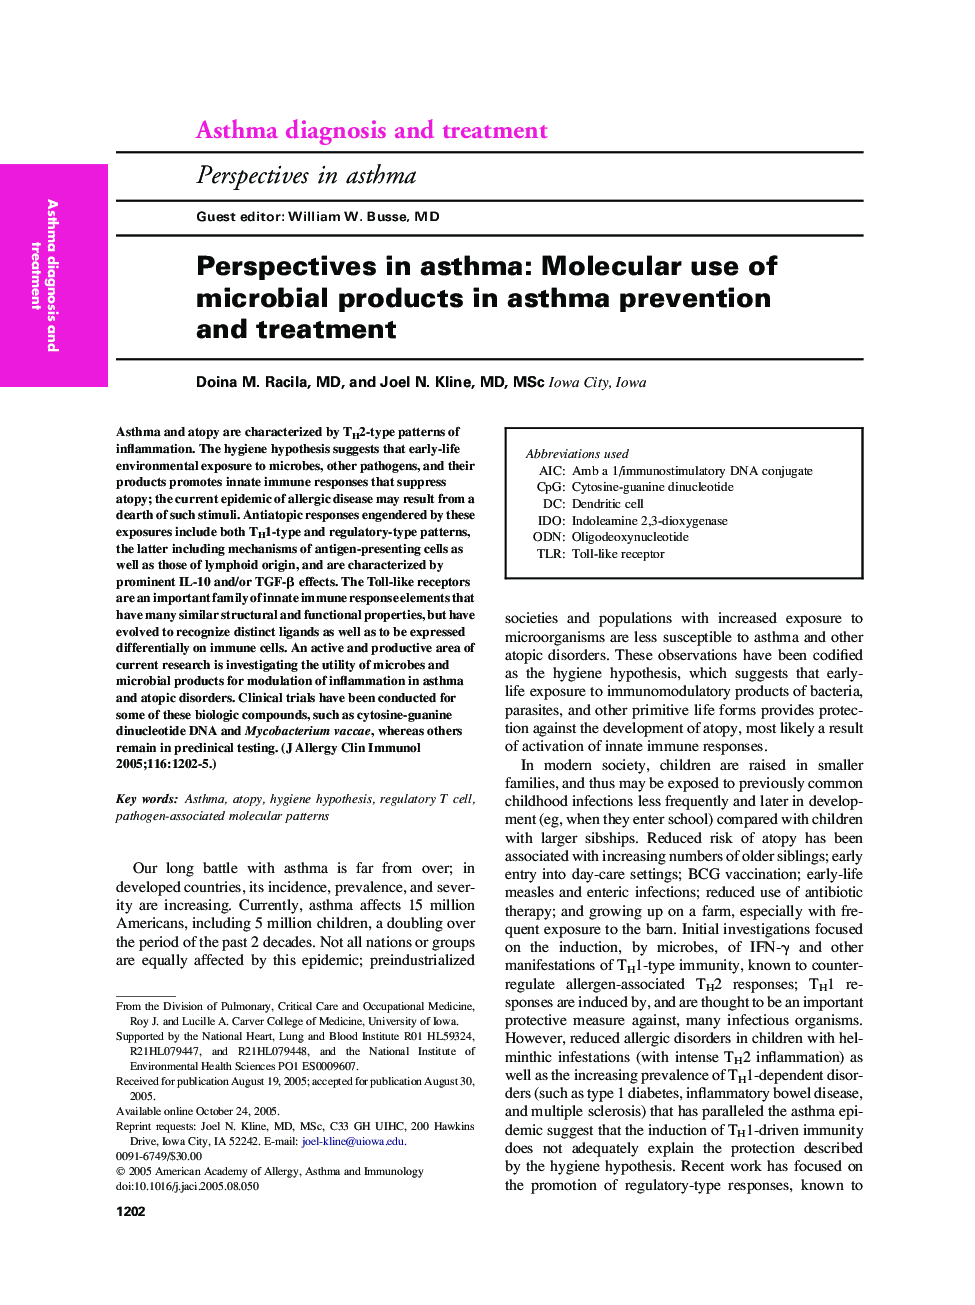 Perspectives in asthma: Molecular use of microbial products in asthma prevention and treatment